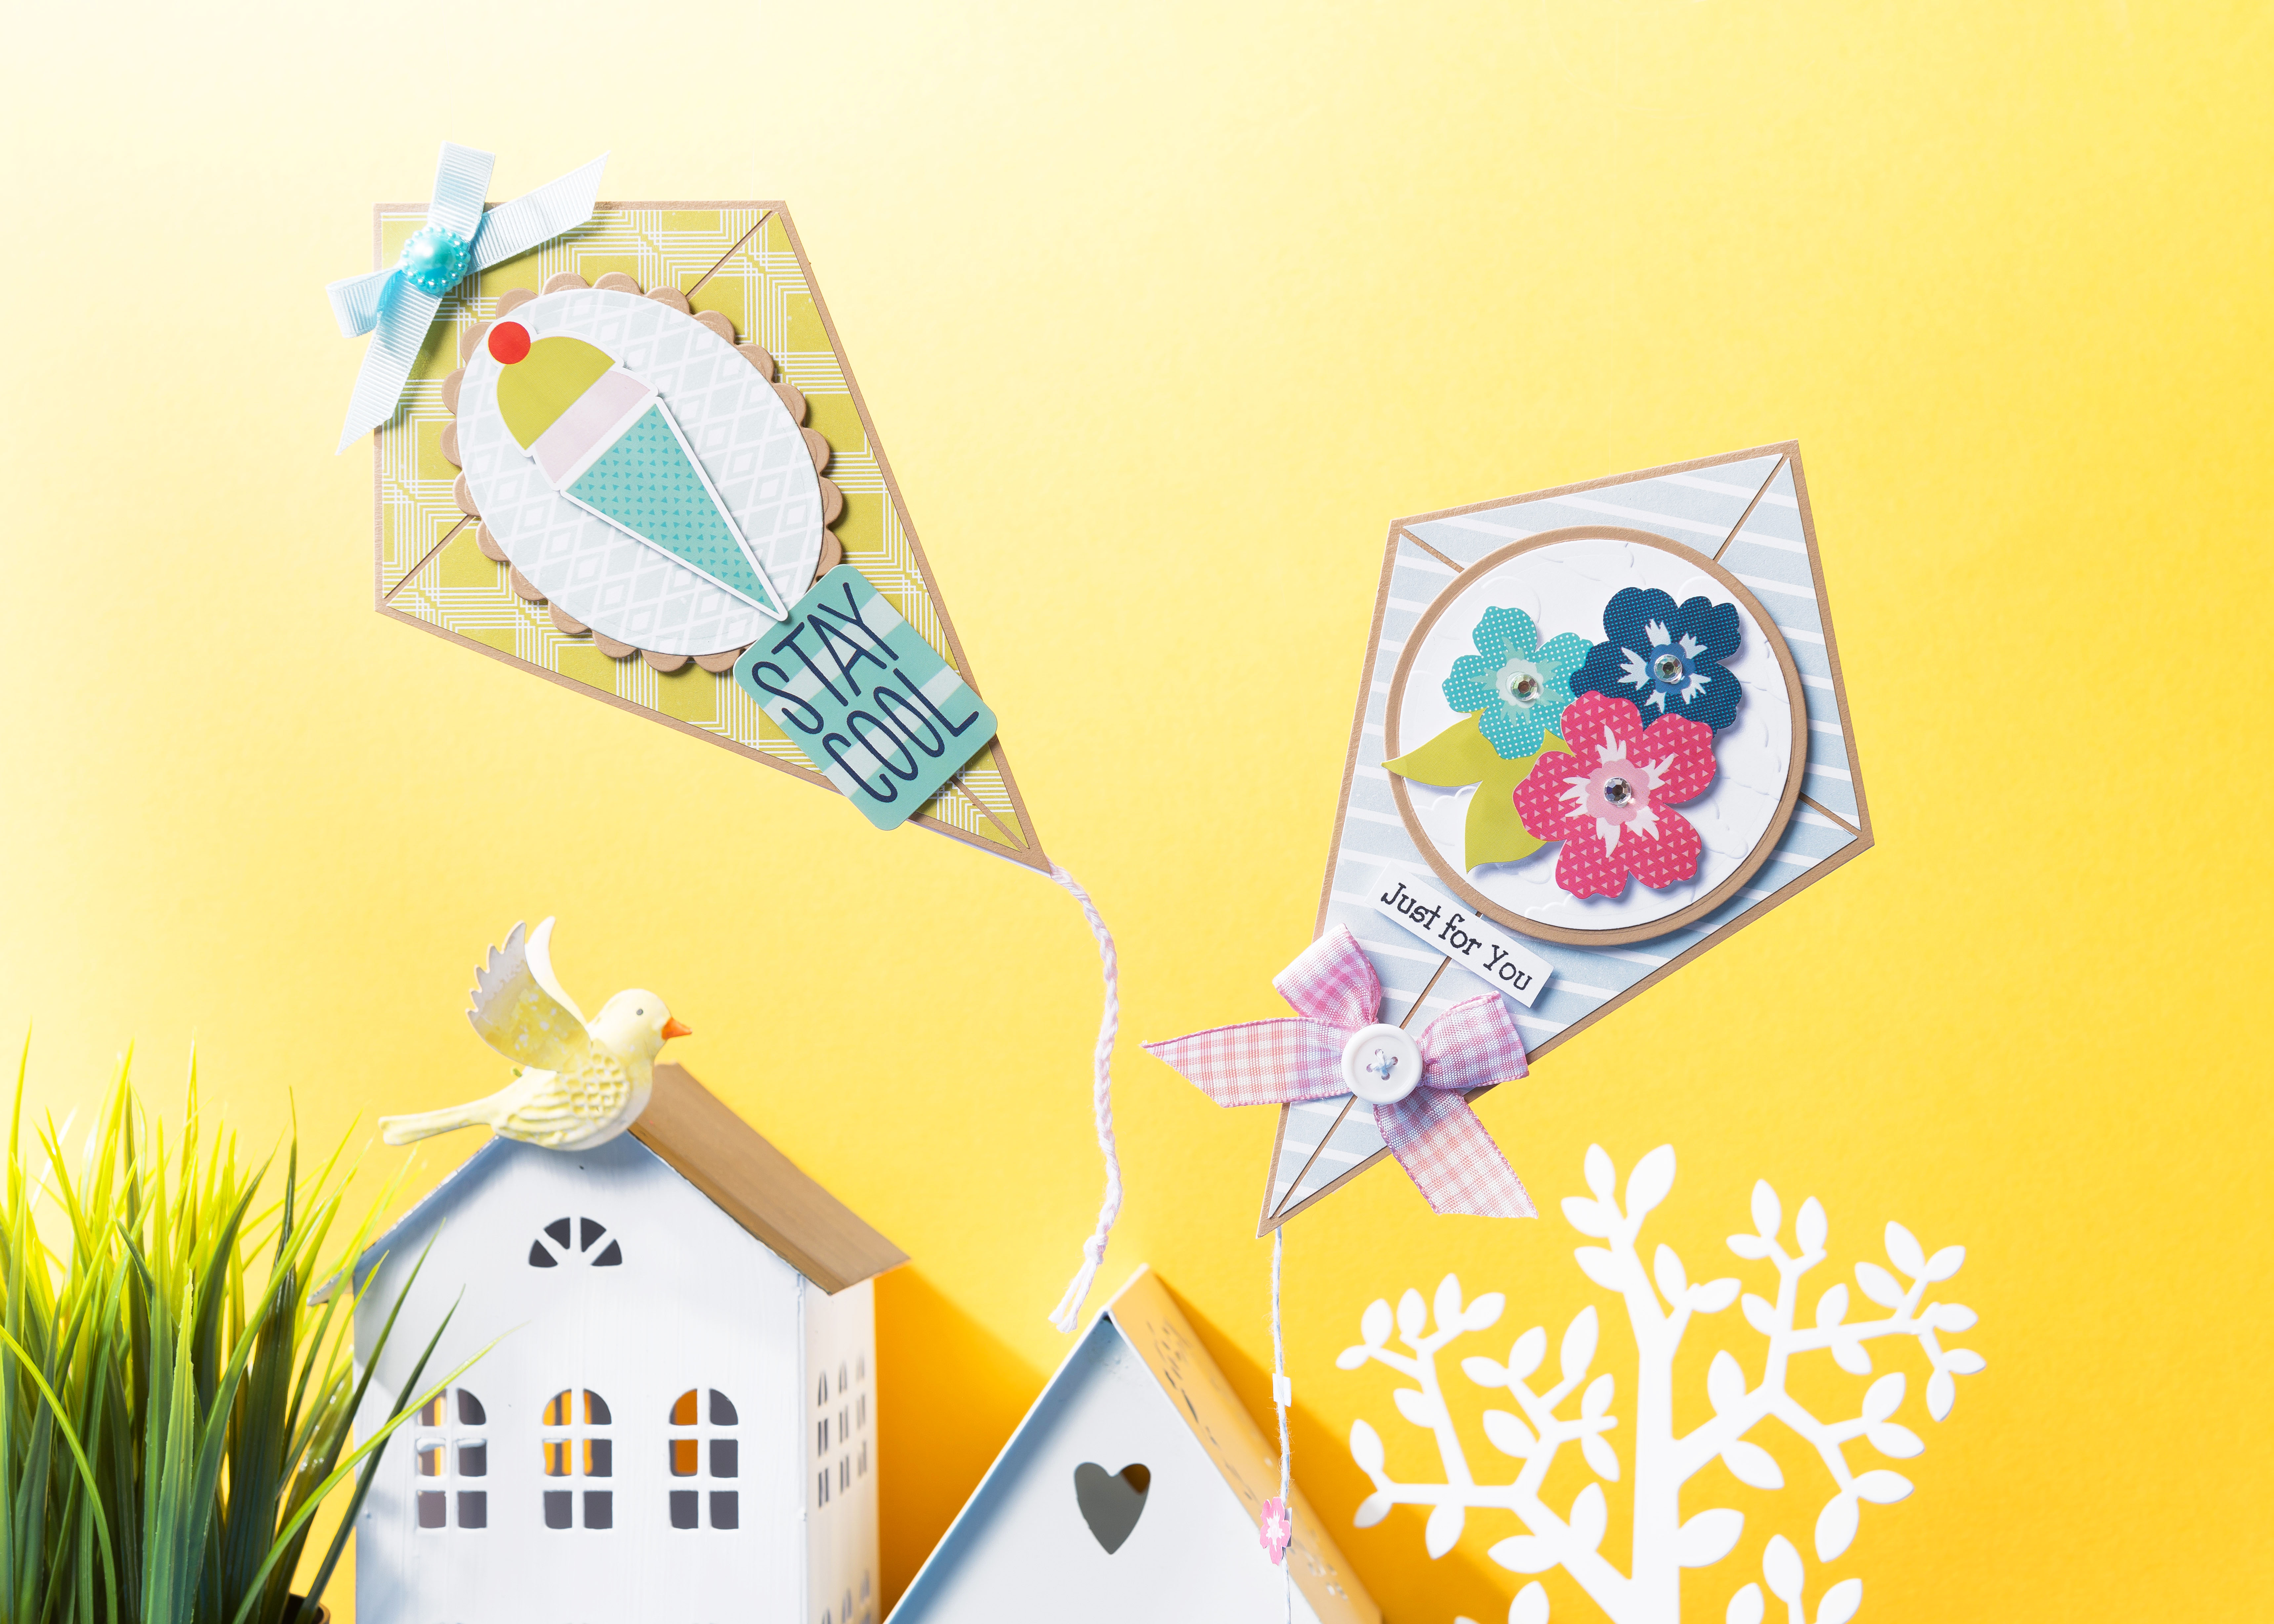 Kite-shaped card, cards 4 and 5